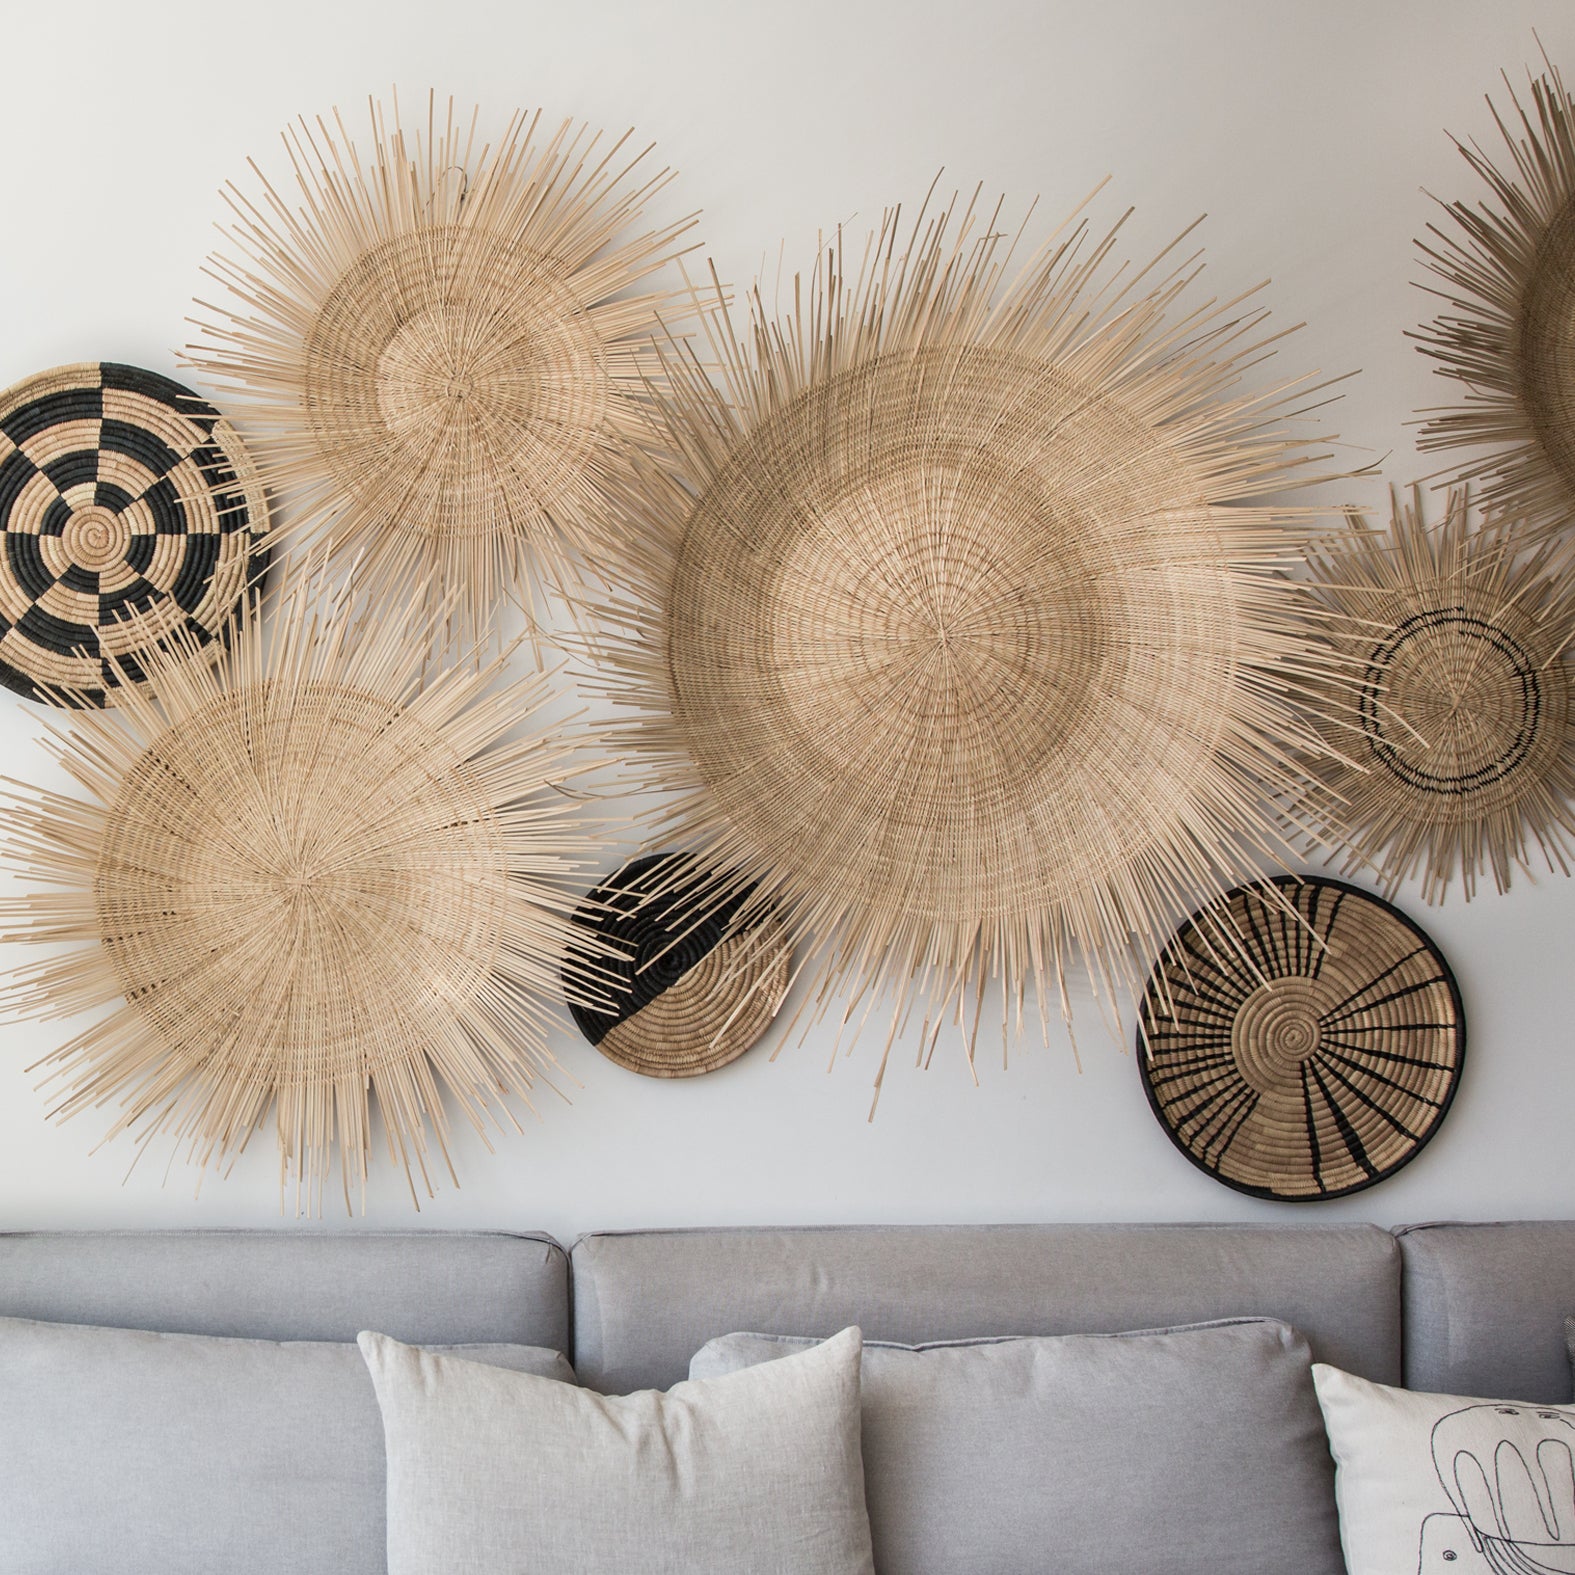 Group photo wall decoration "Sun plate". Hand-woven from palm fibres.